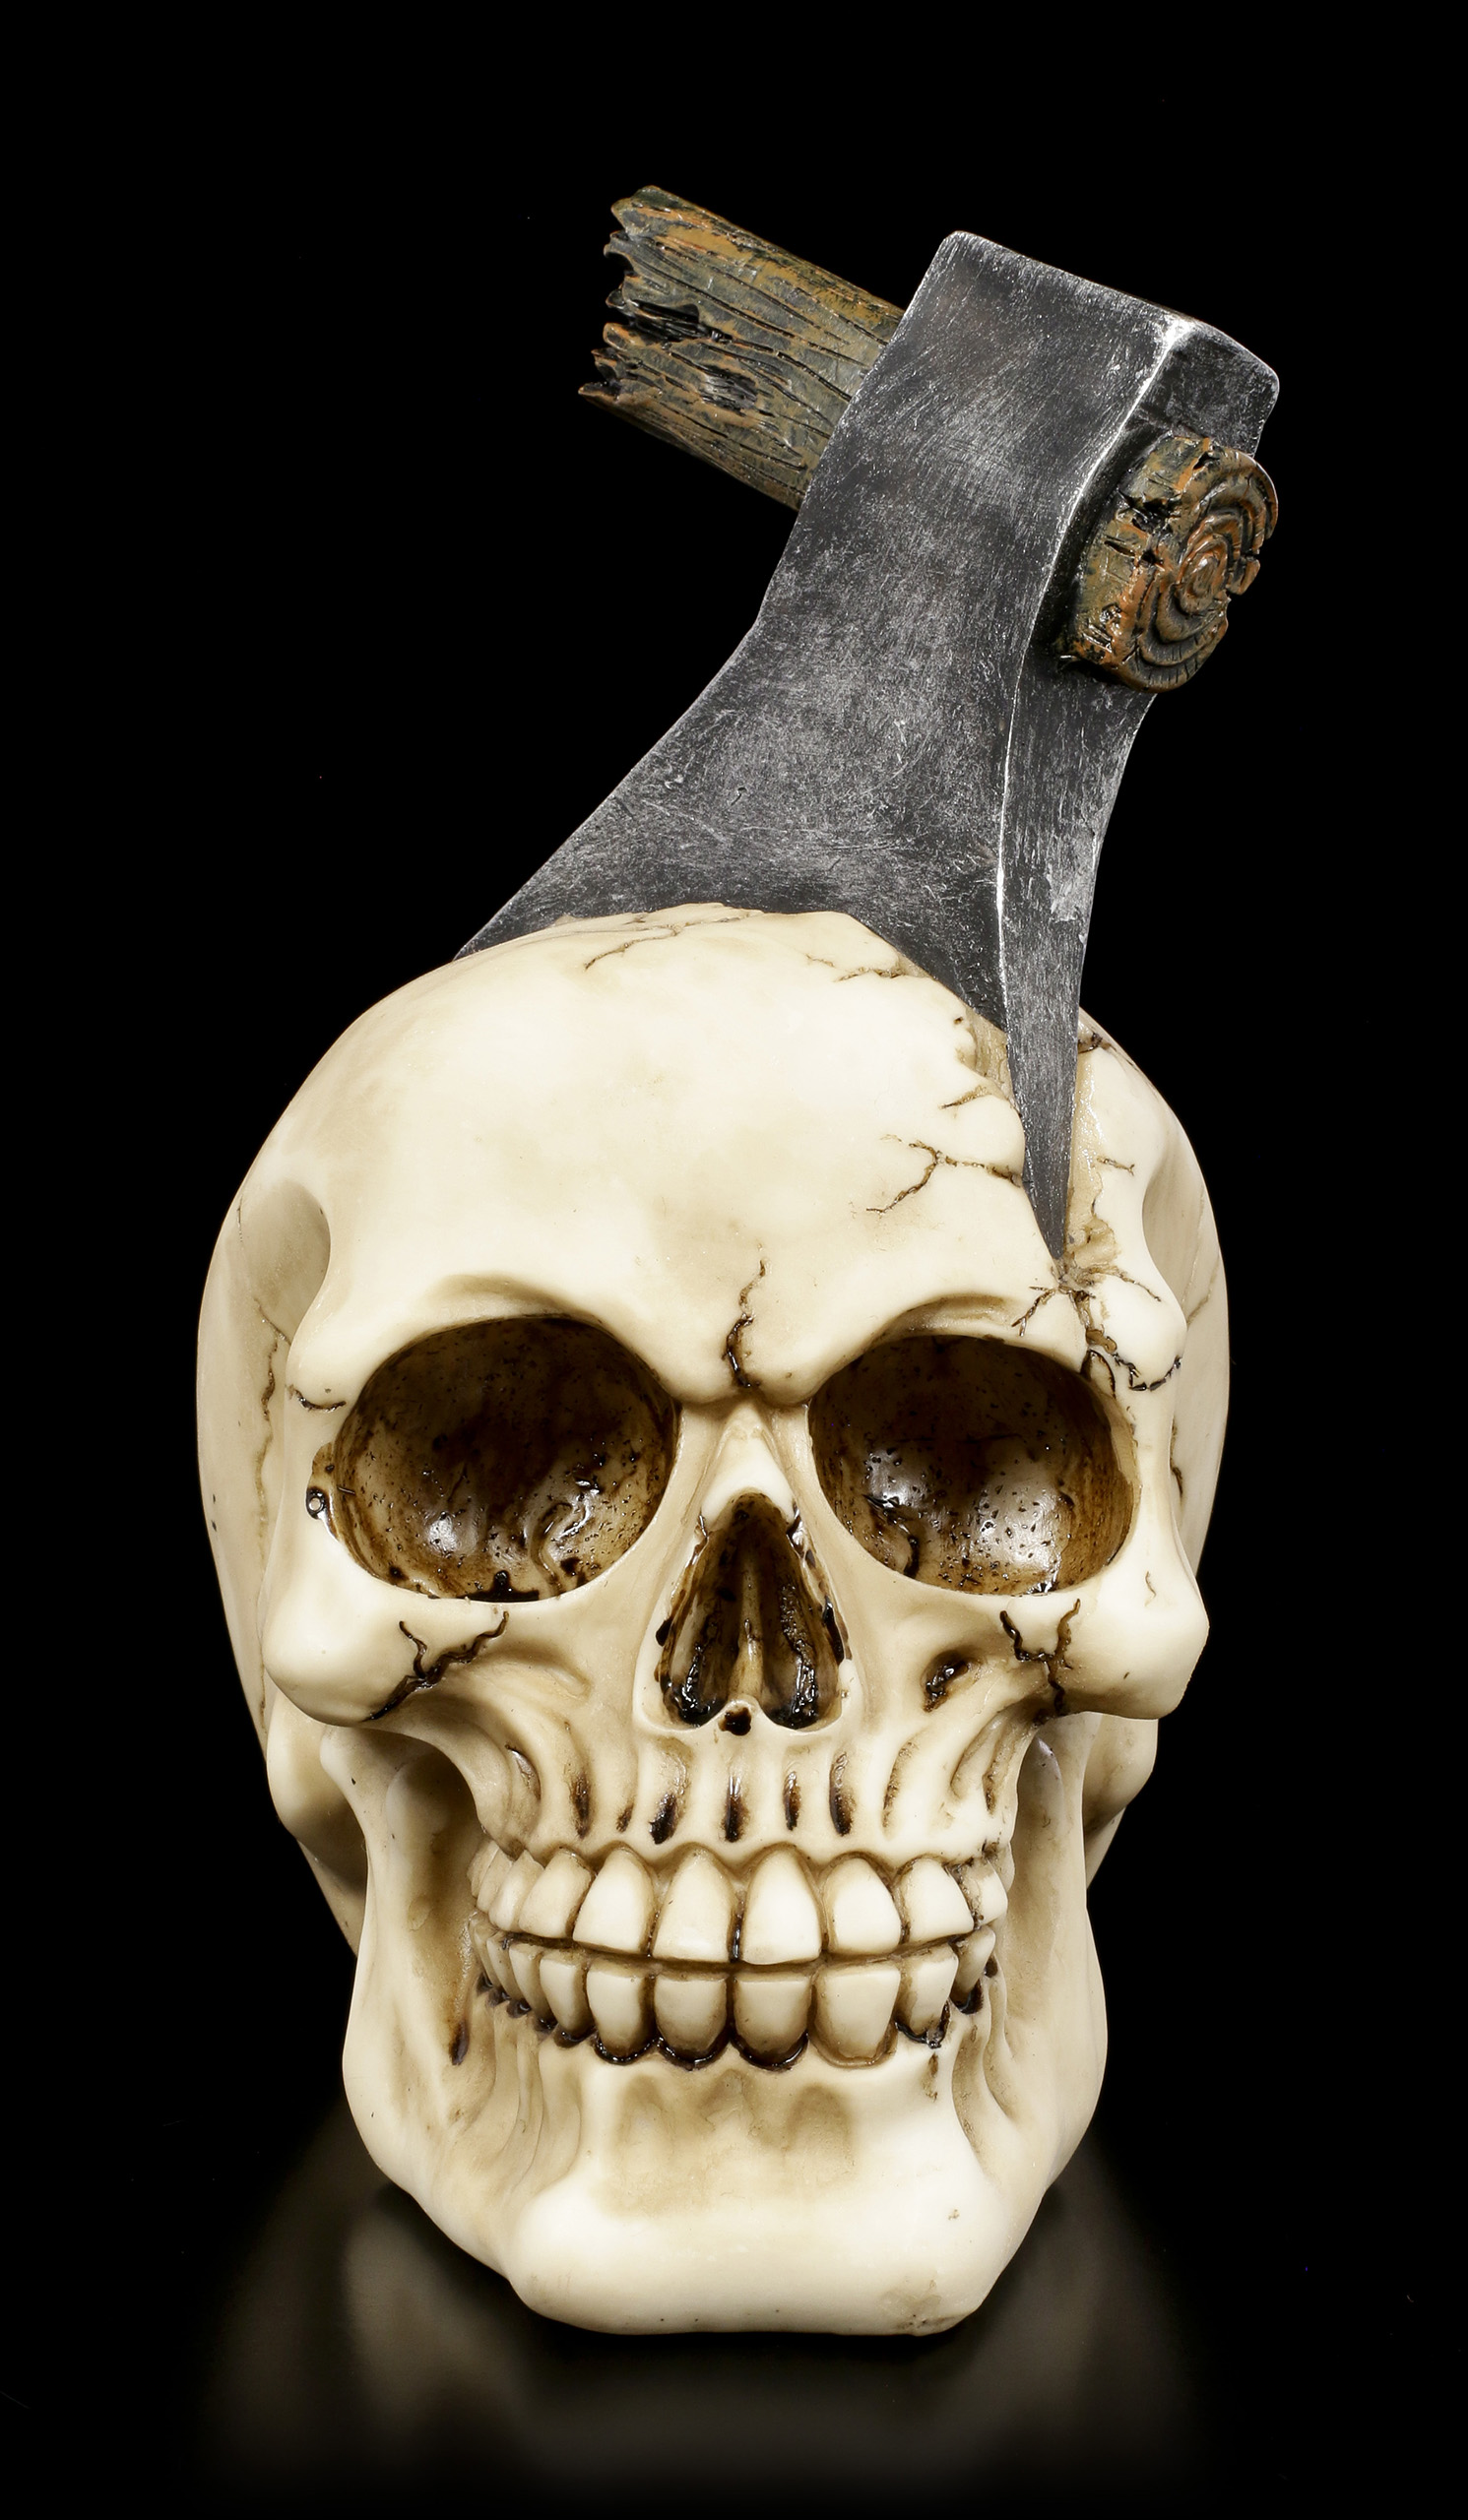 Skull with Axe in Head Ornament Figurine Gift 